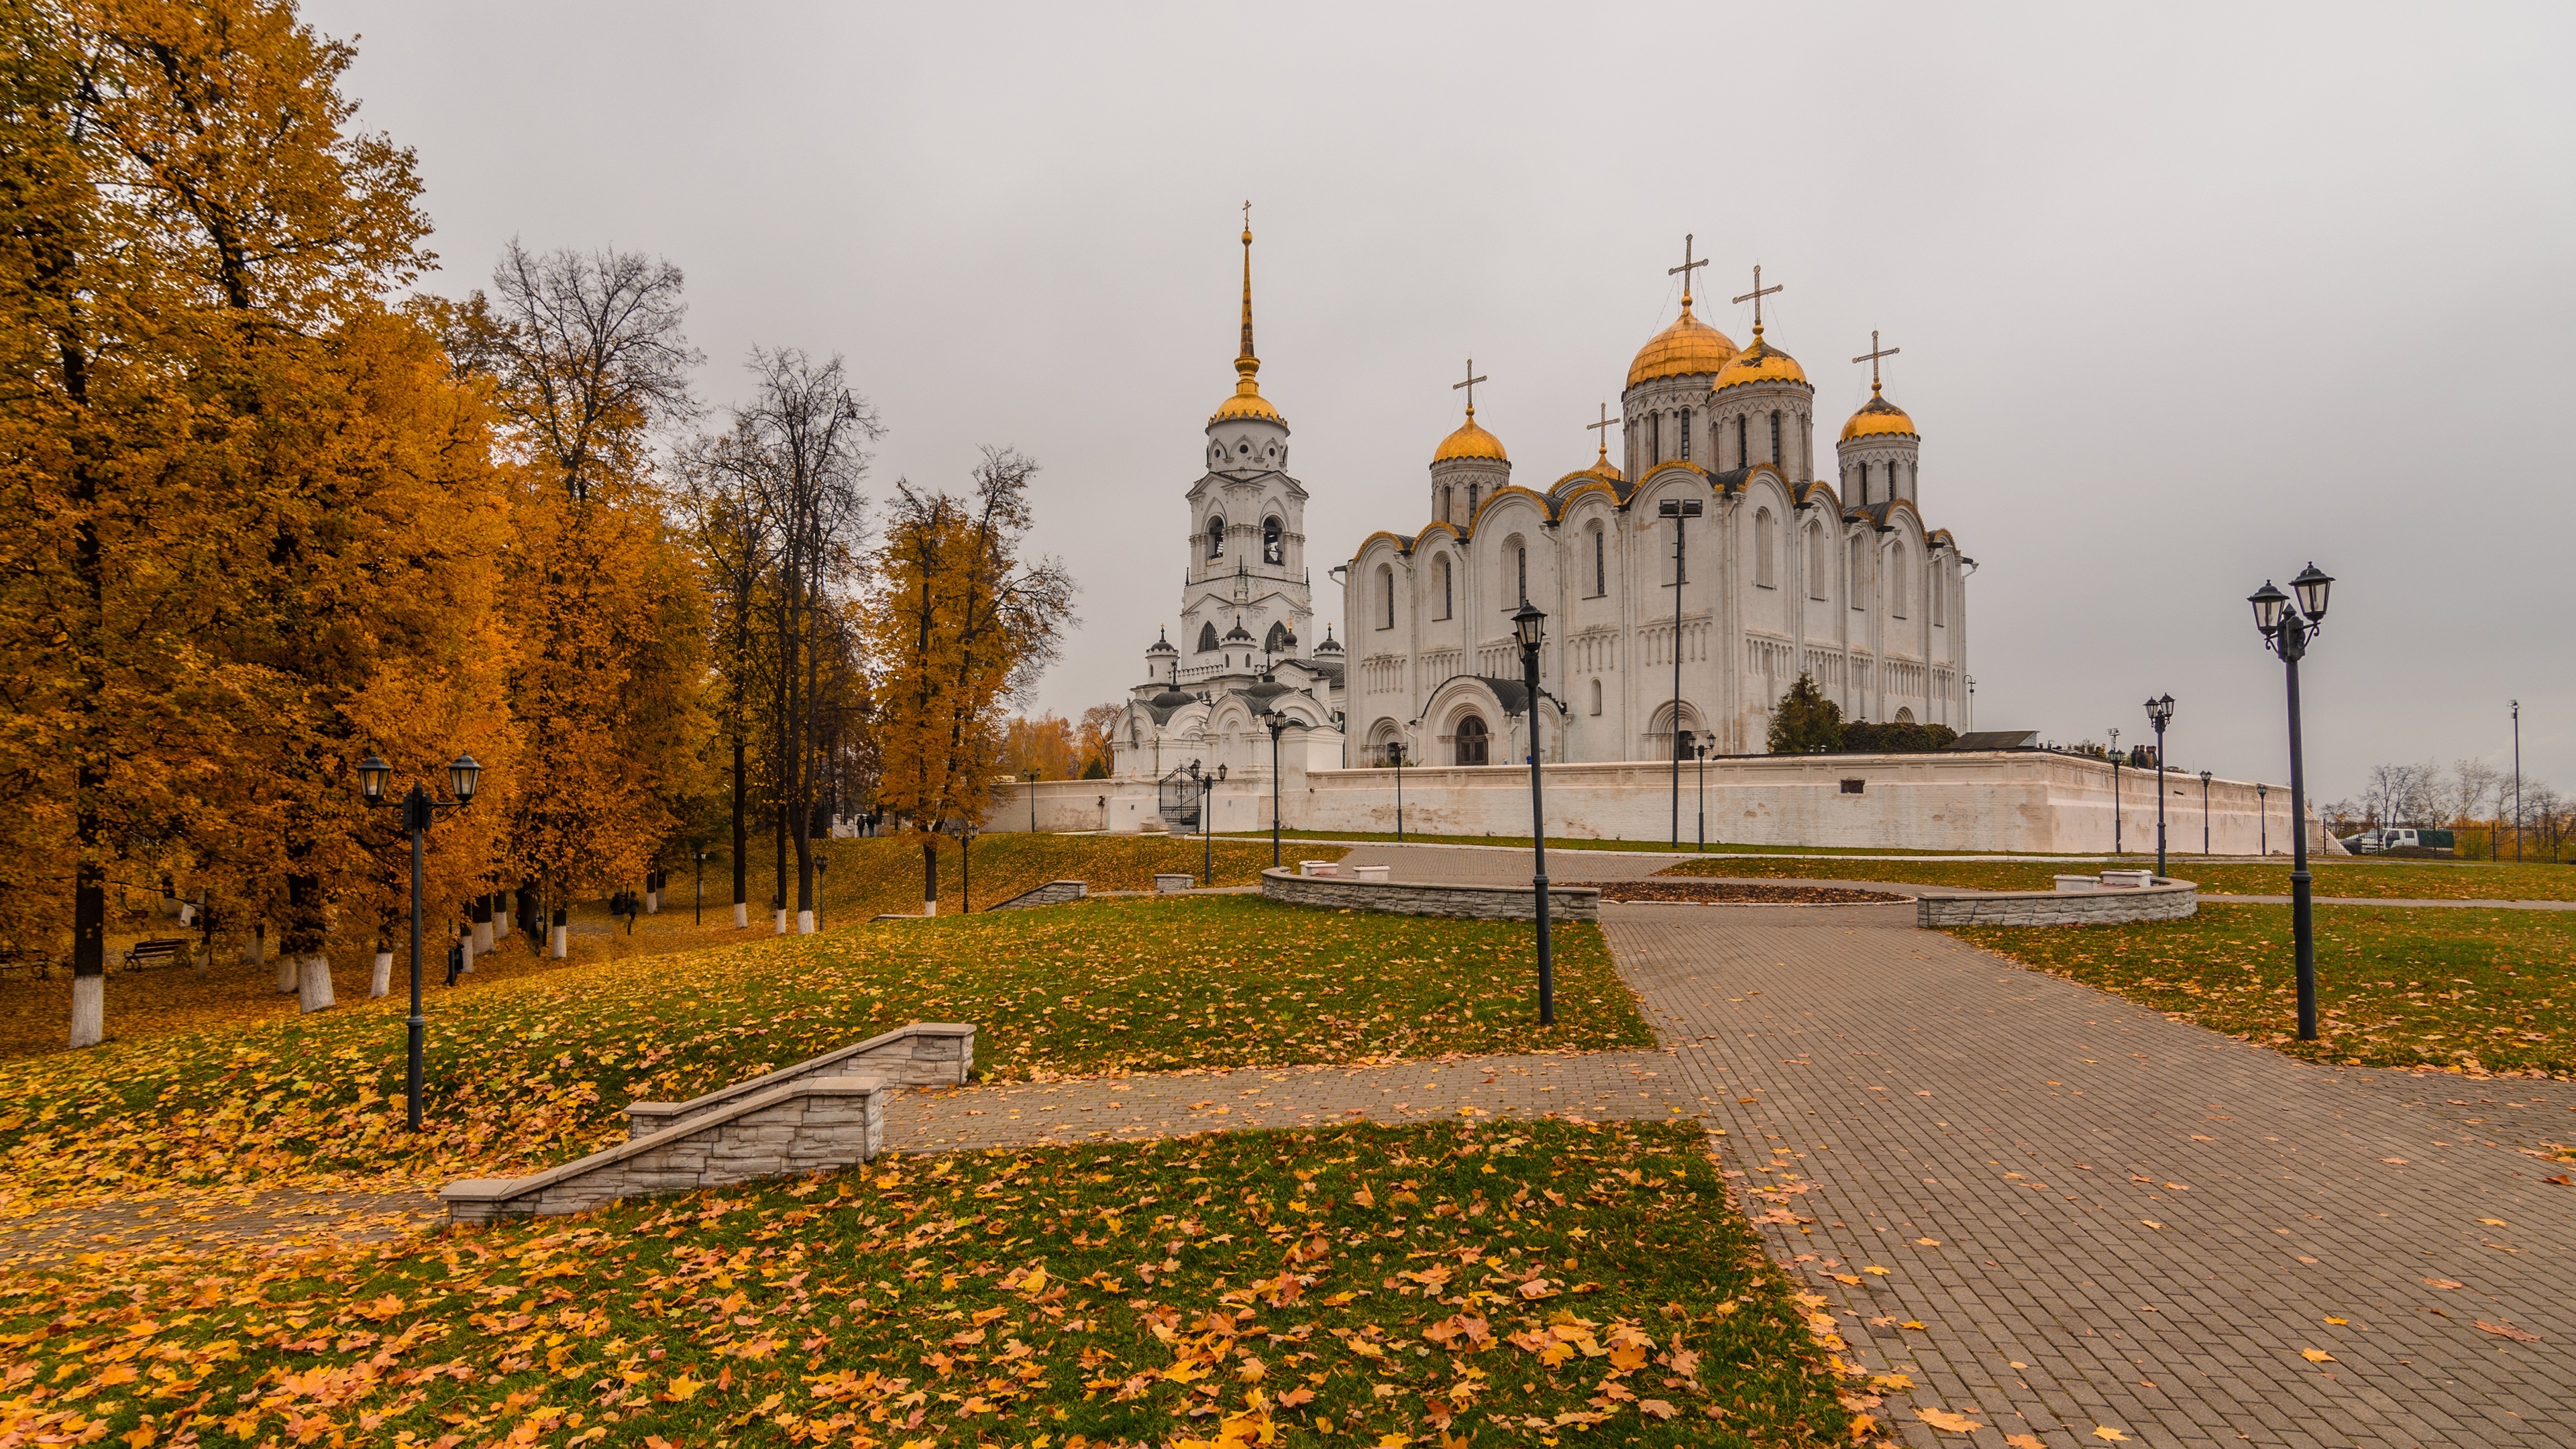 Cathedral: The Dormition Cathedral in Vladimir, Russia, A mother church of Medieval Russia in the 13th and 14th centuries. 3840x2160 4K Wallpaper.